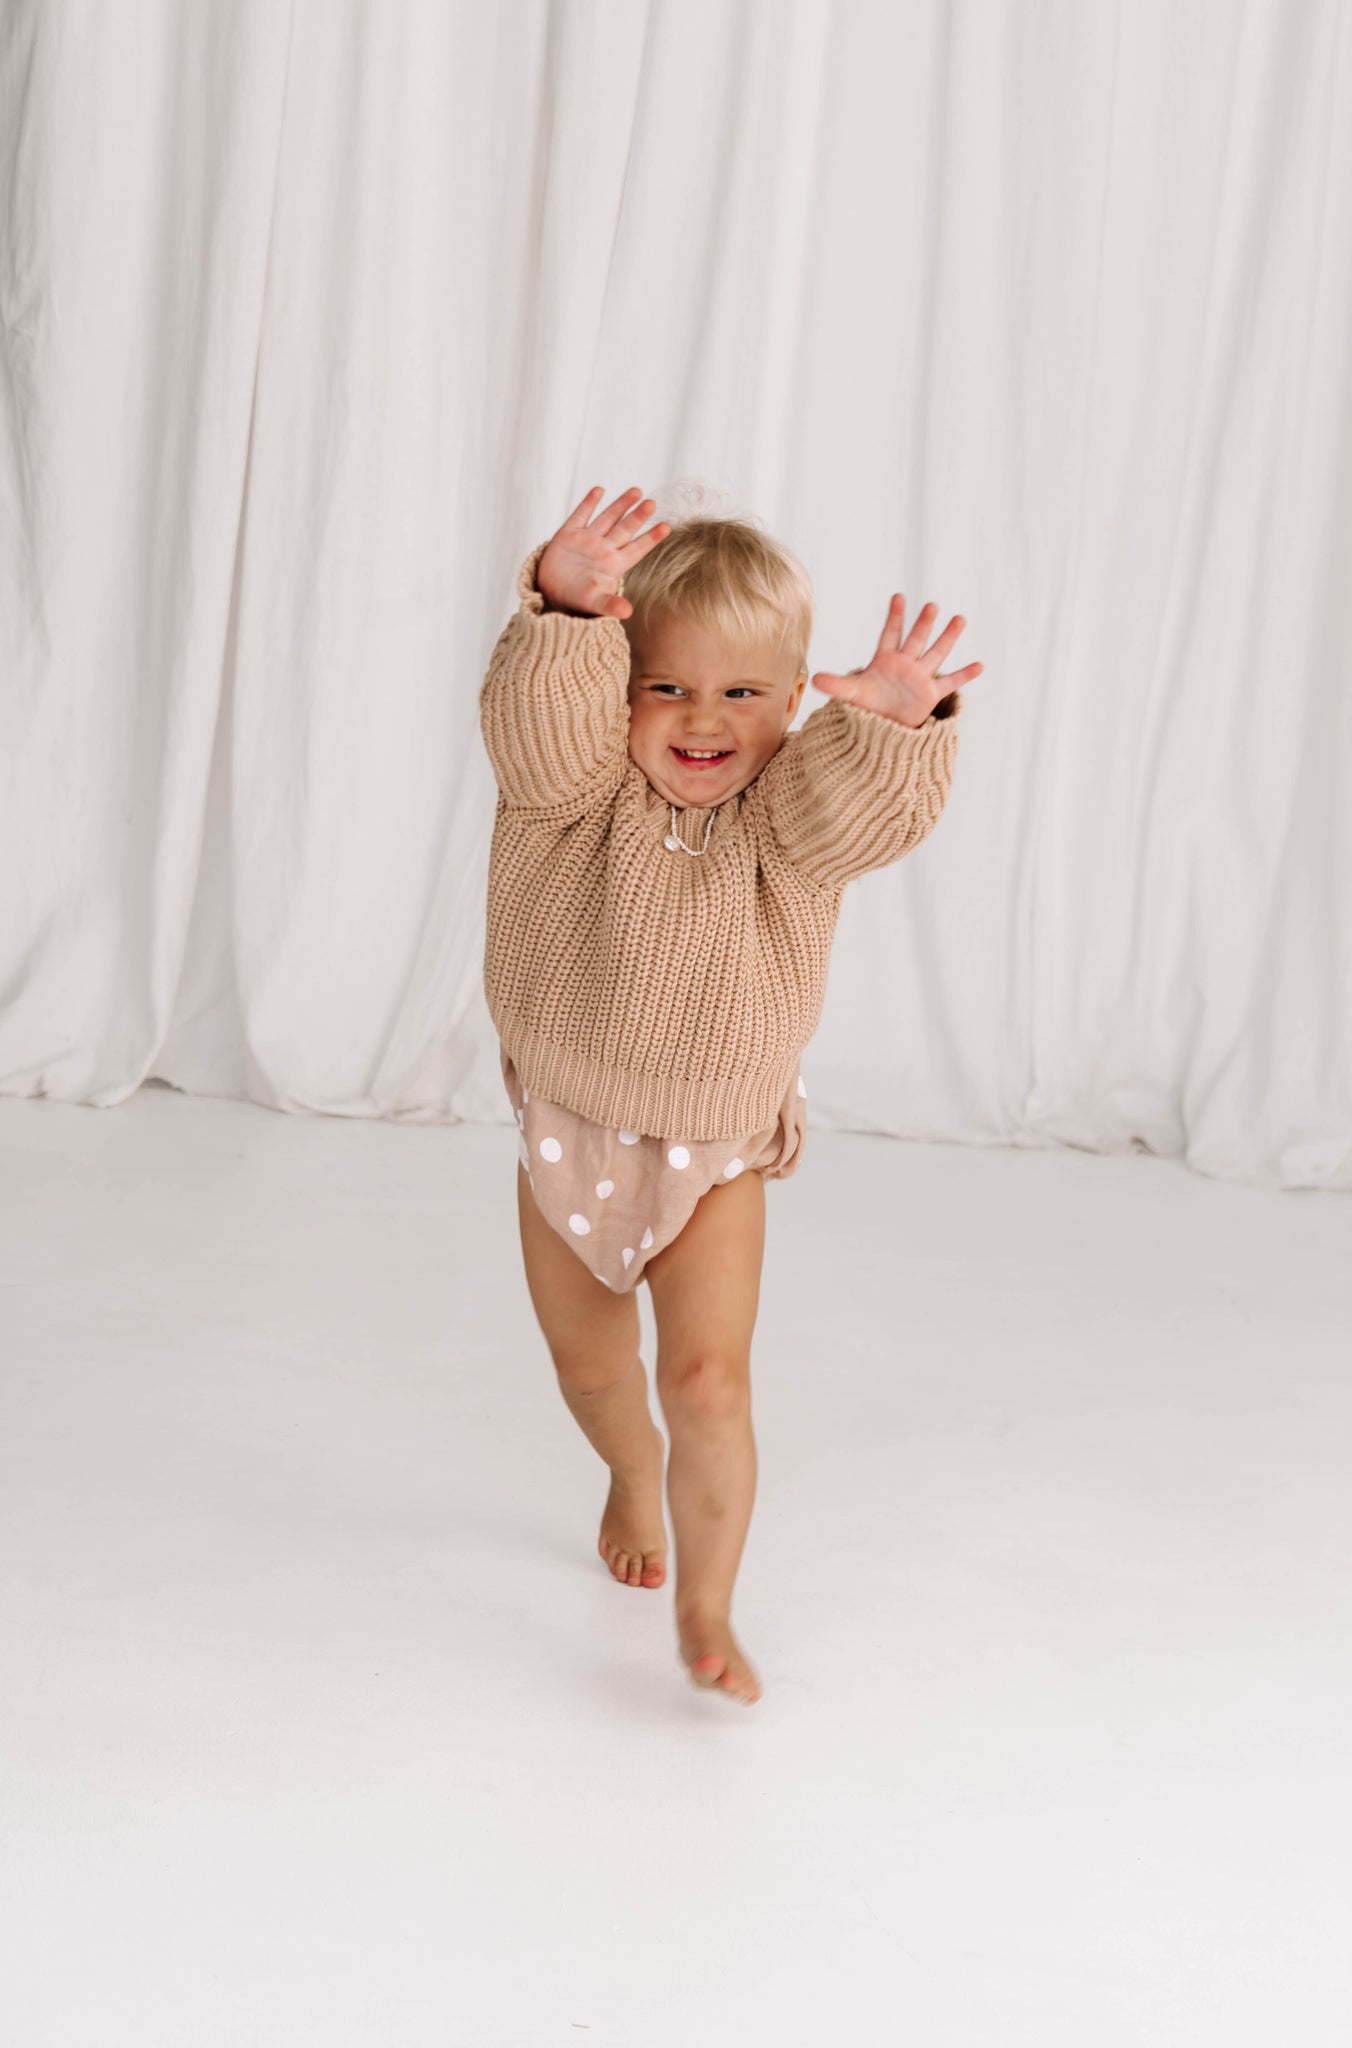 baby toddler knit jumper wool cotton blend soft relaxed fit with balloon billowy sleeve feature in toffee beige warm hue